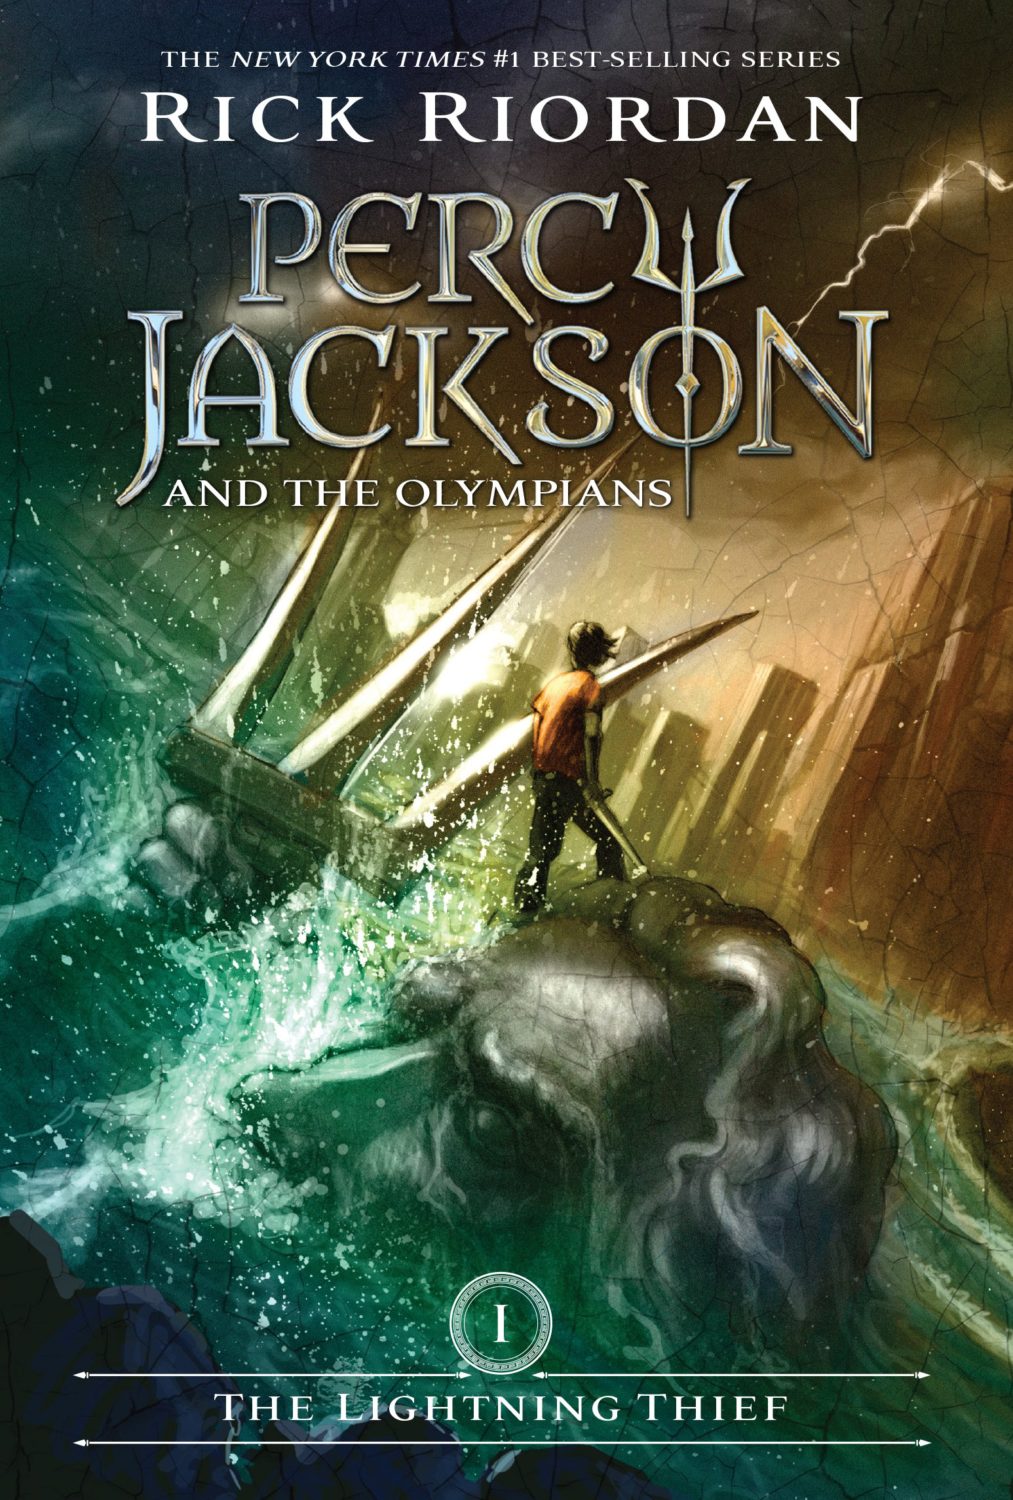 Percy Jackson and other books like Harry Potter for kids.